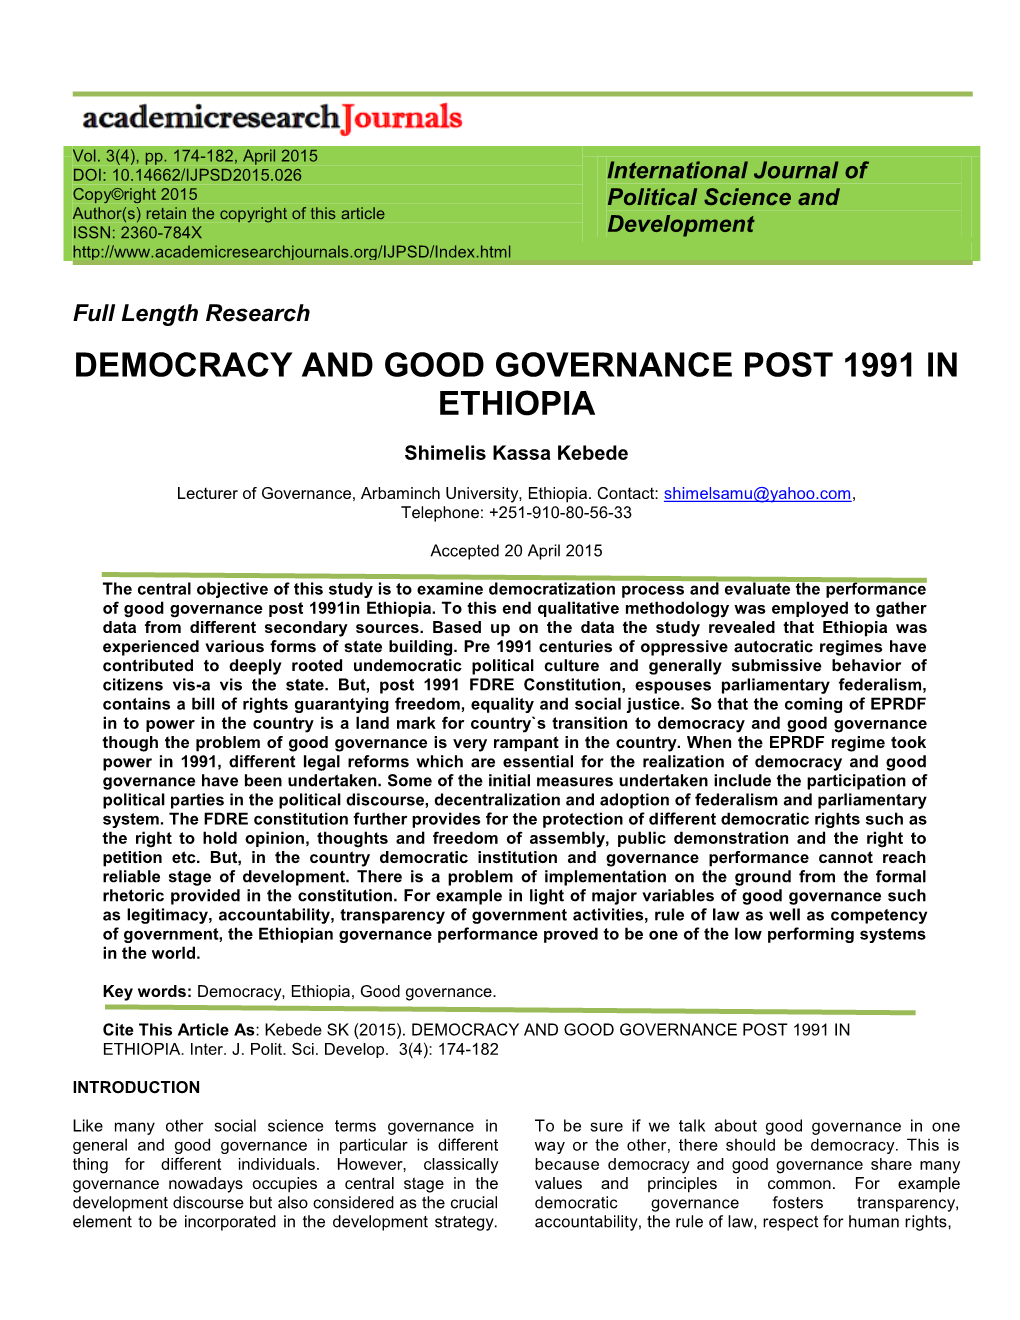 Democracy and Good Governance Post 1991 in Ethiopia